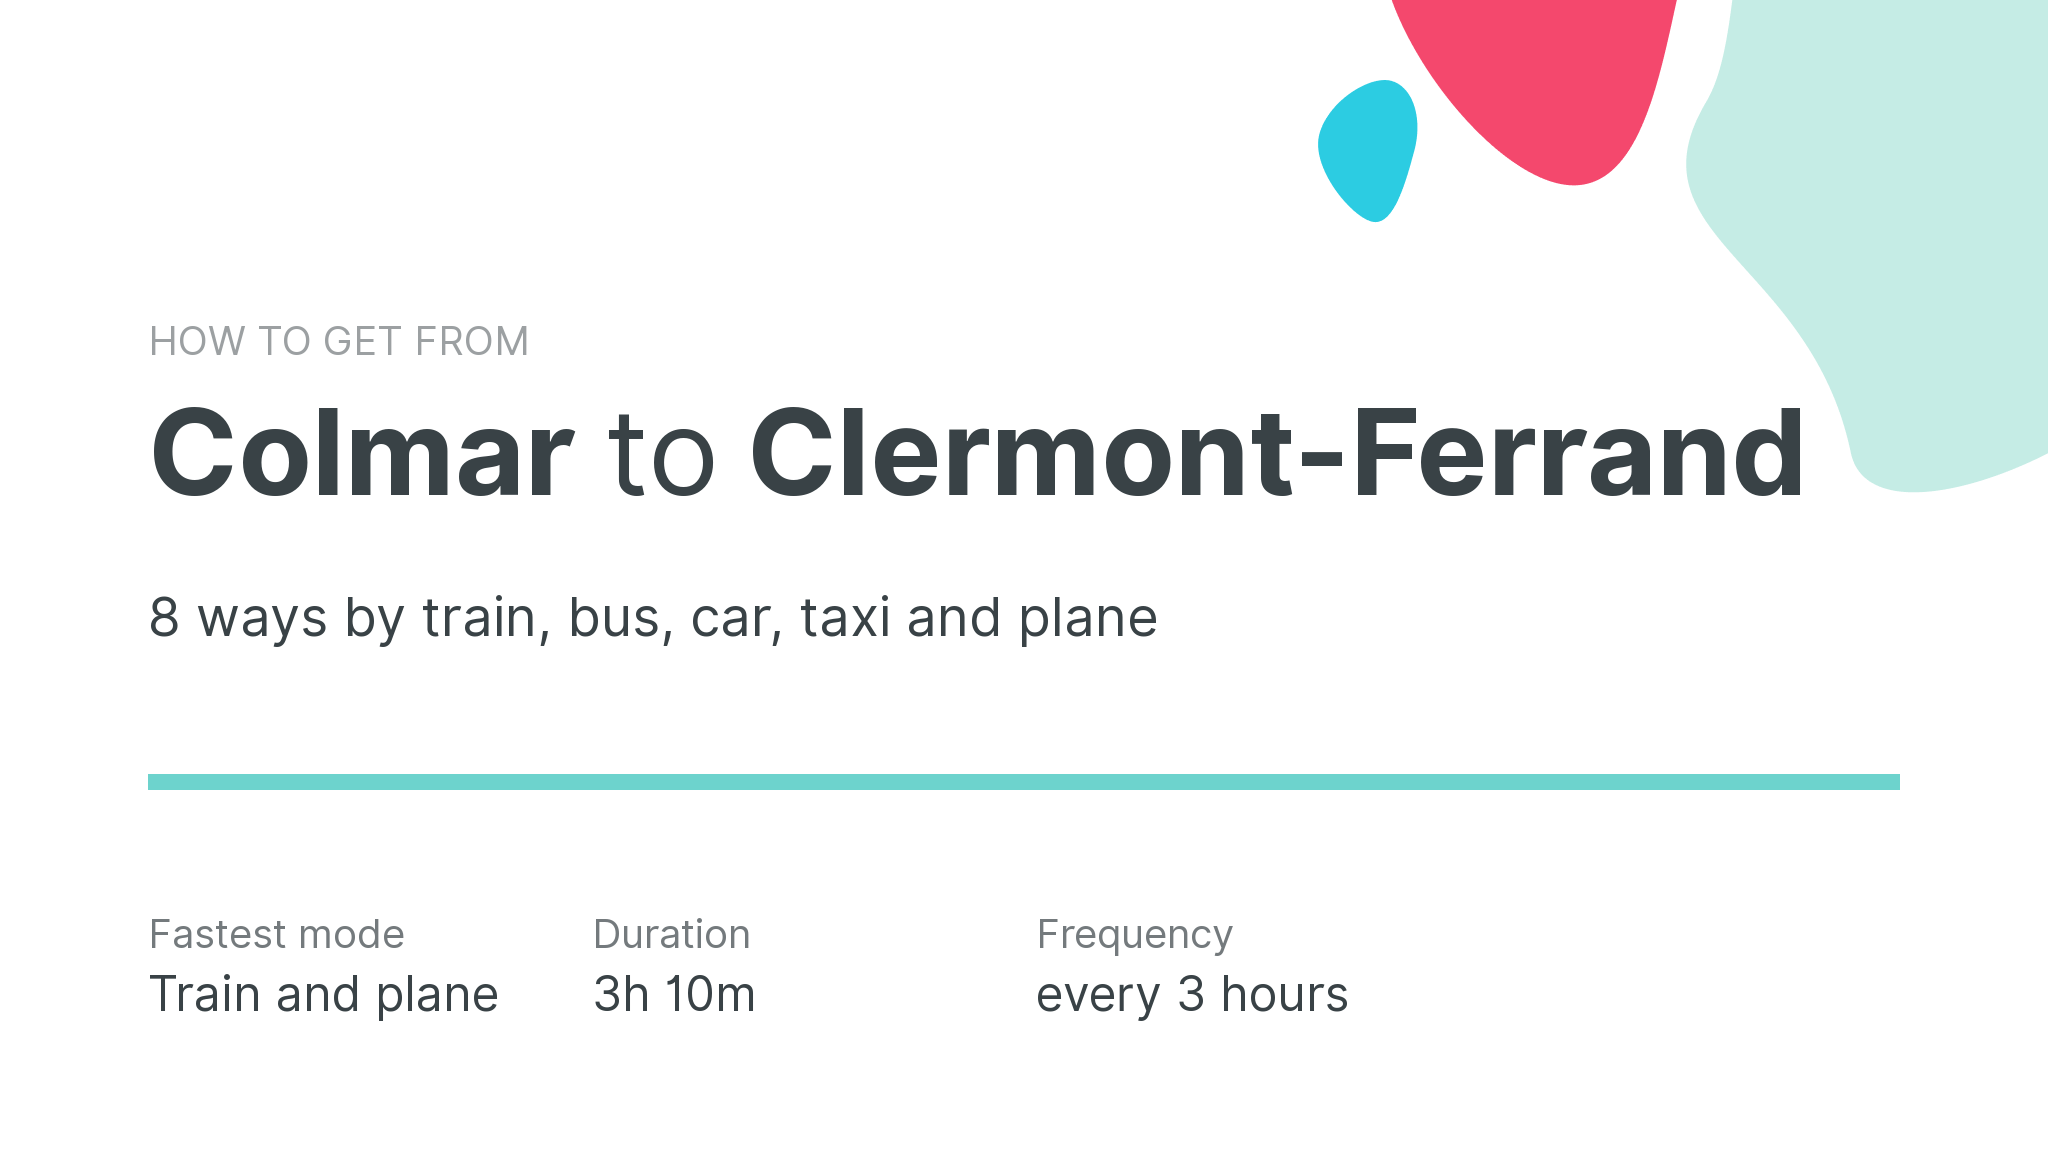 How do I get from Colmar to Clermont-Ferrand